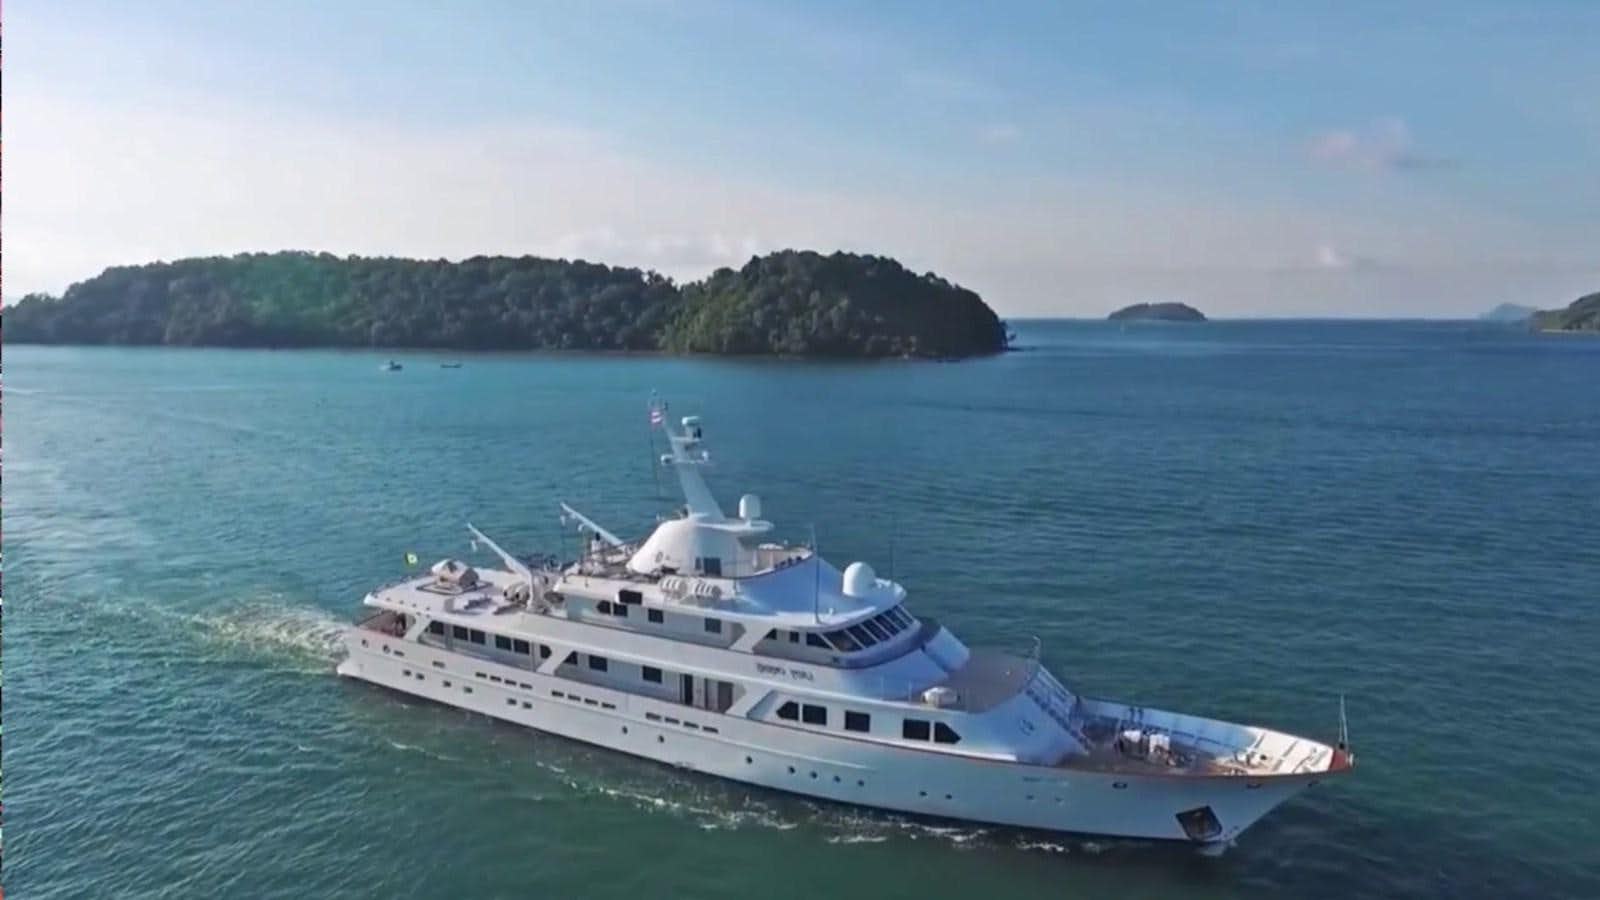 Watch Video for LANGKAWI LADY Yacht for Sale